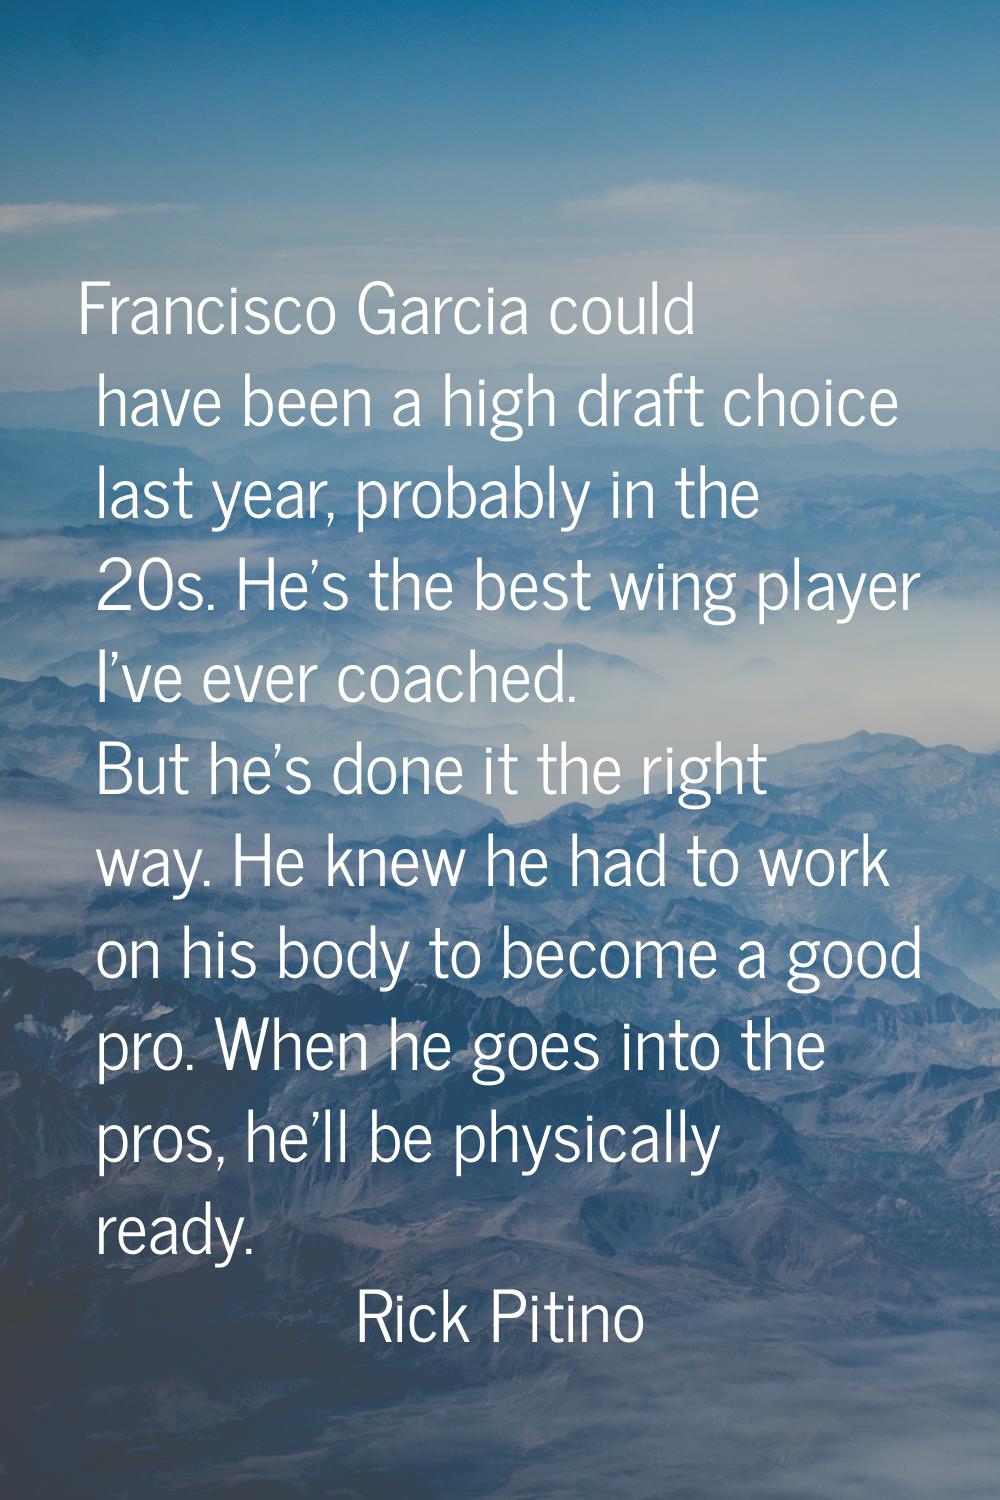 Francisco Garcia could have been a high draft choice last year, probably in the 20s. He's the best 